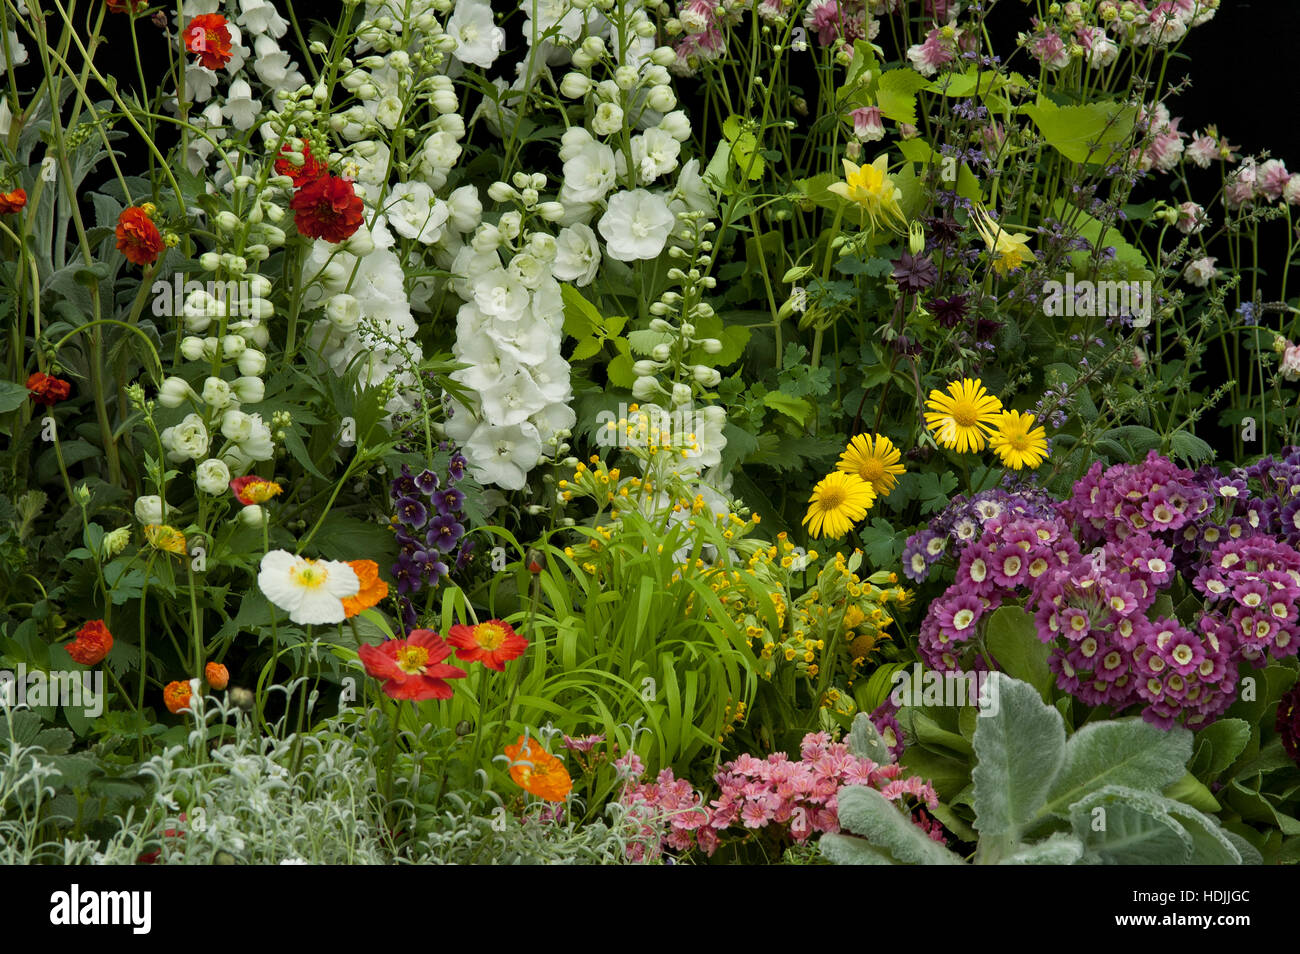 Annual flower garden with mixed colored flowers. Stock Photo